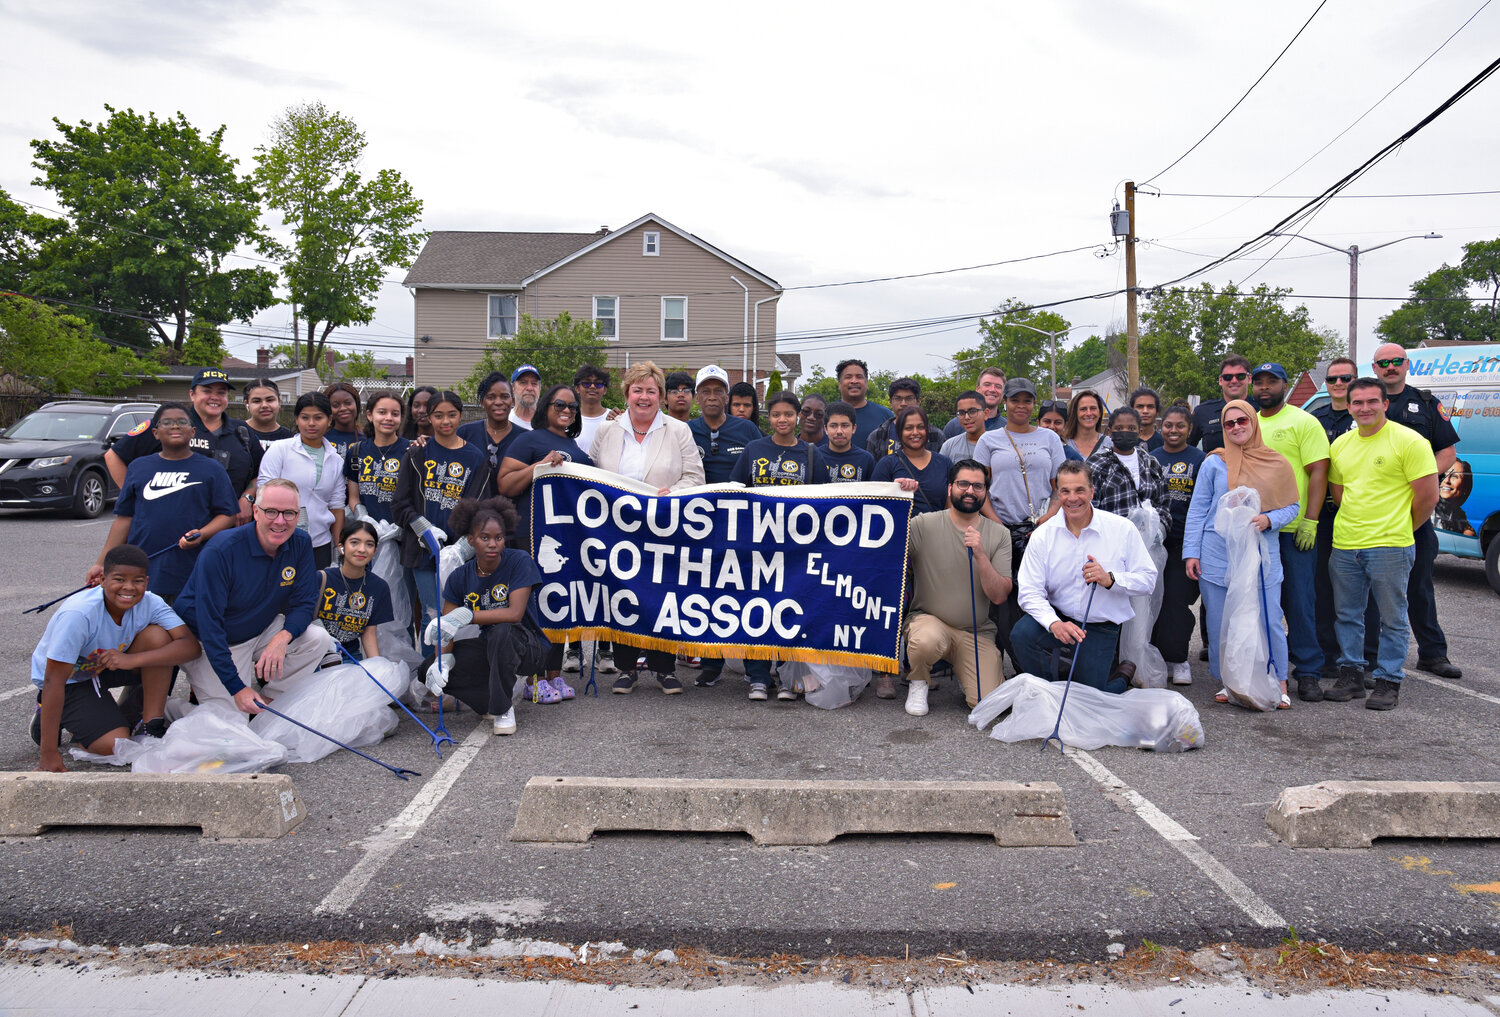 Dozens of Locustwood Gotham Civic Association members, Elmont Memorial High School students and Town of Hempstead elected officials took on the trash on Hempstead Turnpike outside UBS Arena in Elmont as part of their cleanup initiative.